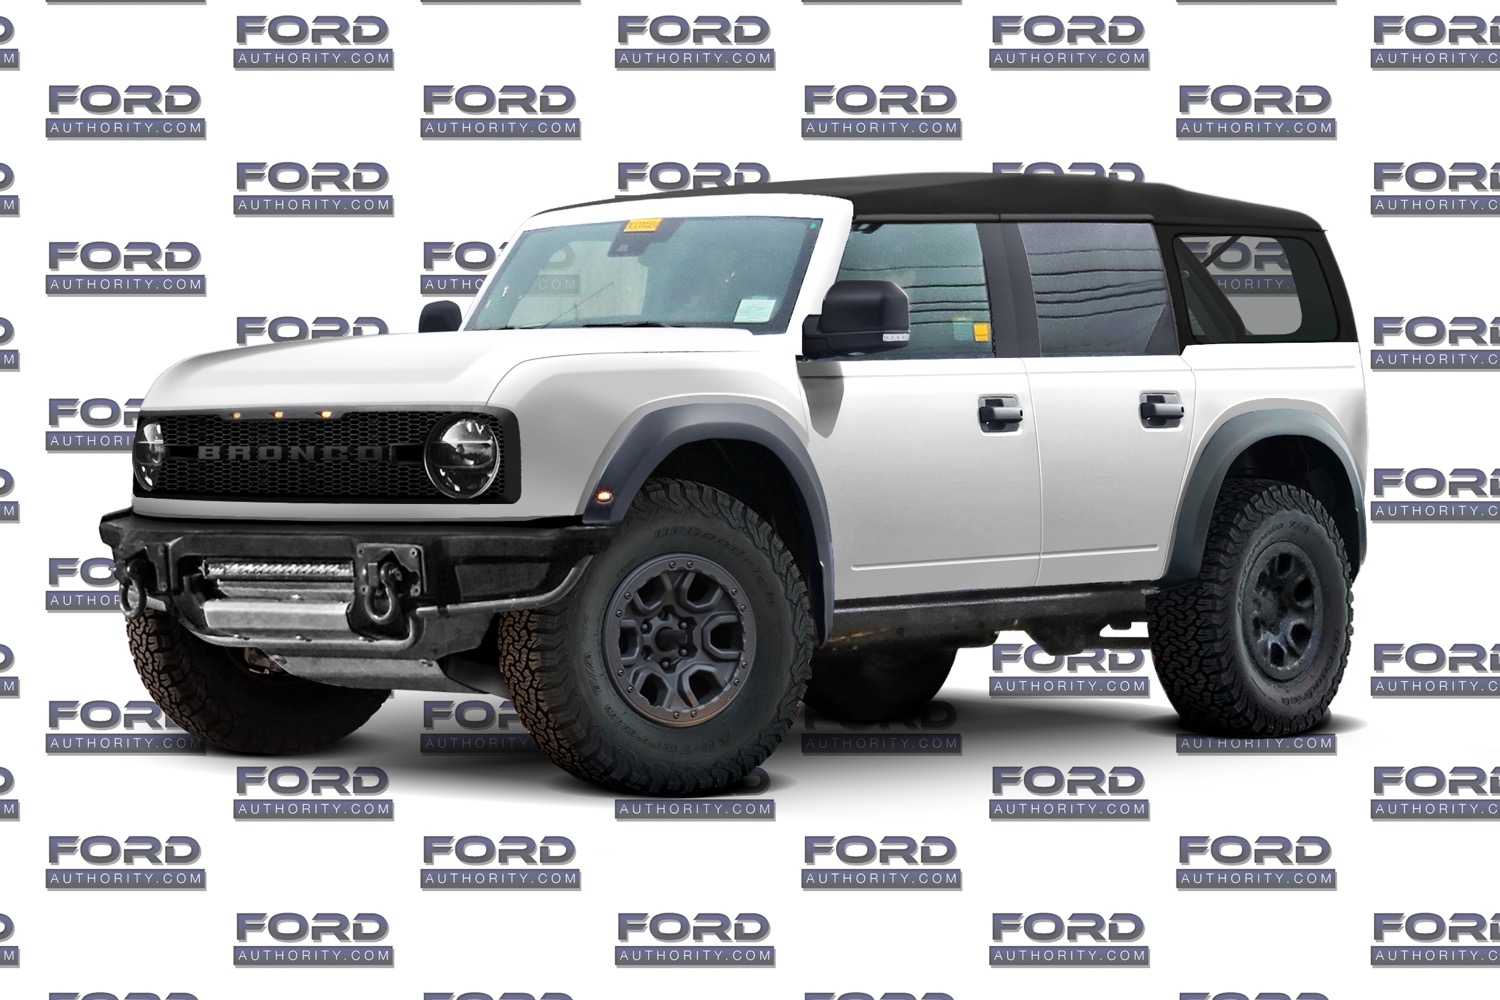 Ford Bronco 2021 Ford Bronco 2-door convertible rendering 2021-Ford-Bronco-Badlands-Four-Door-Renderings-002-White